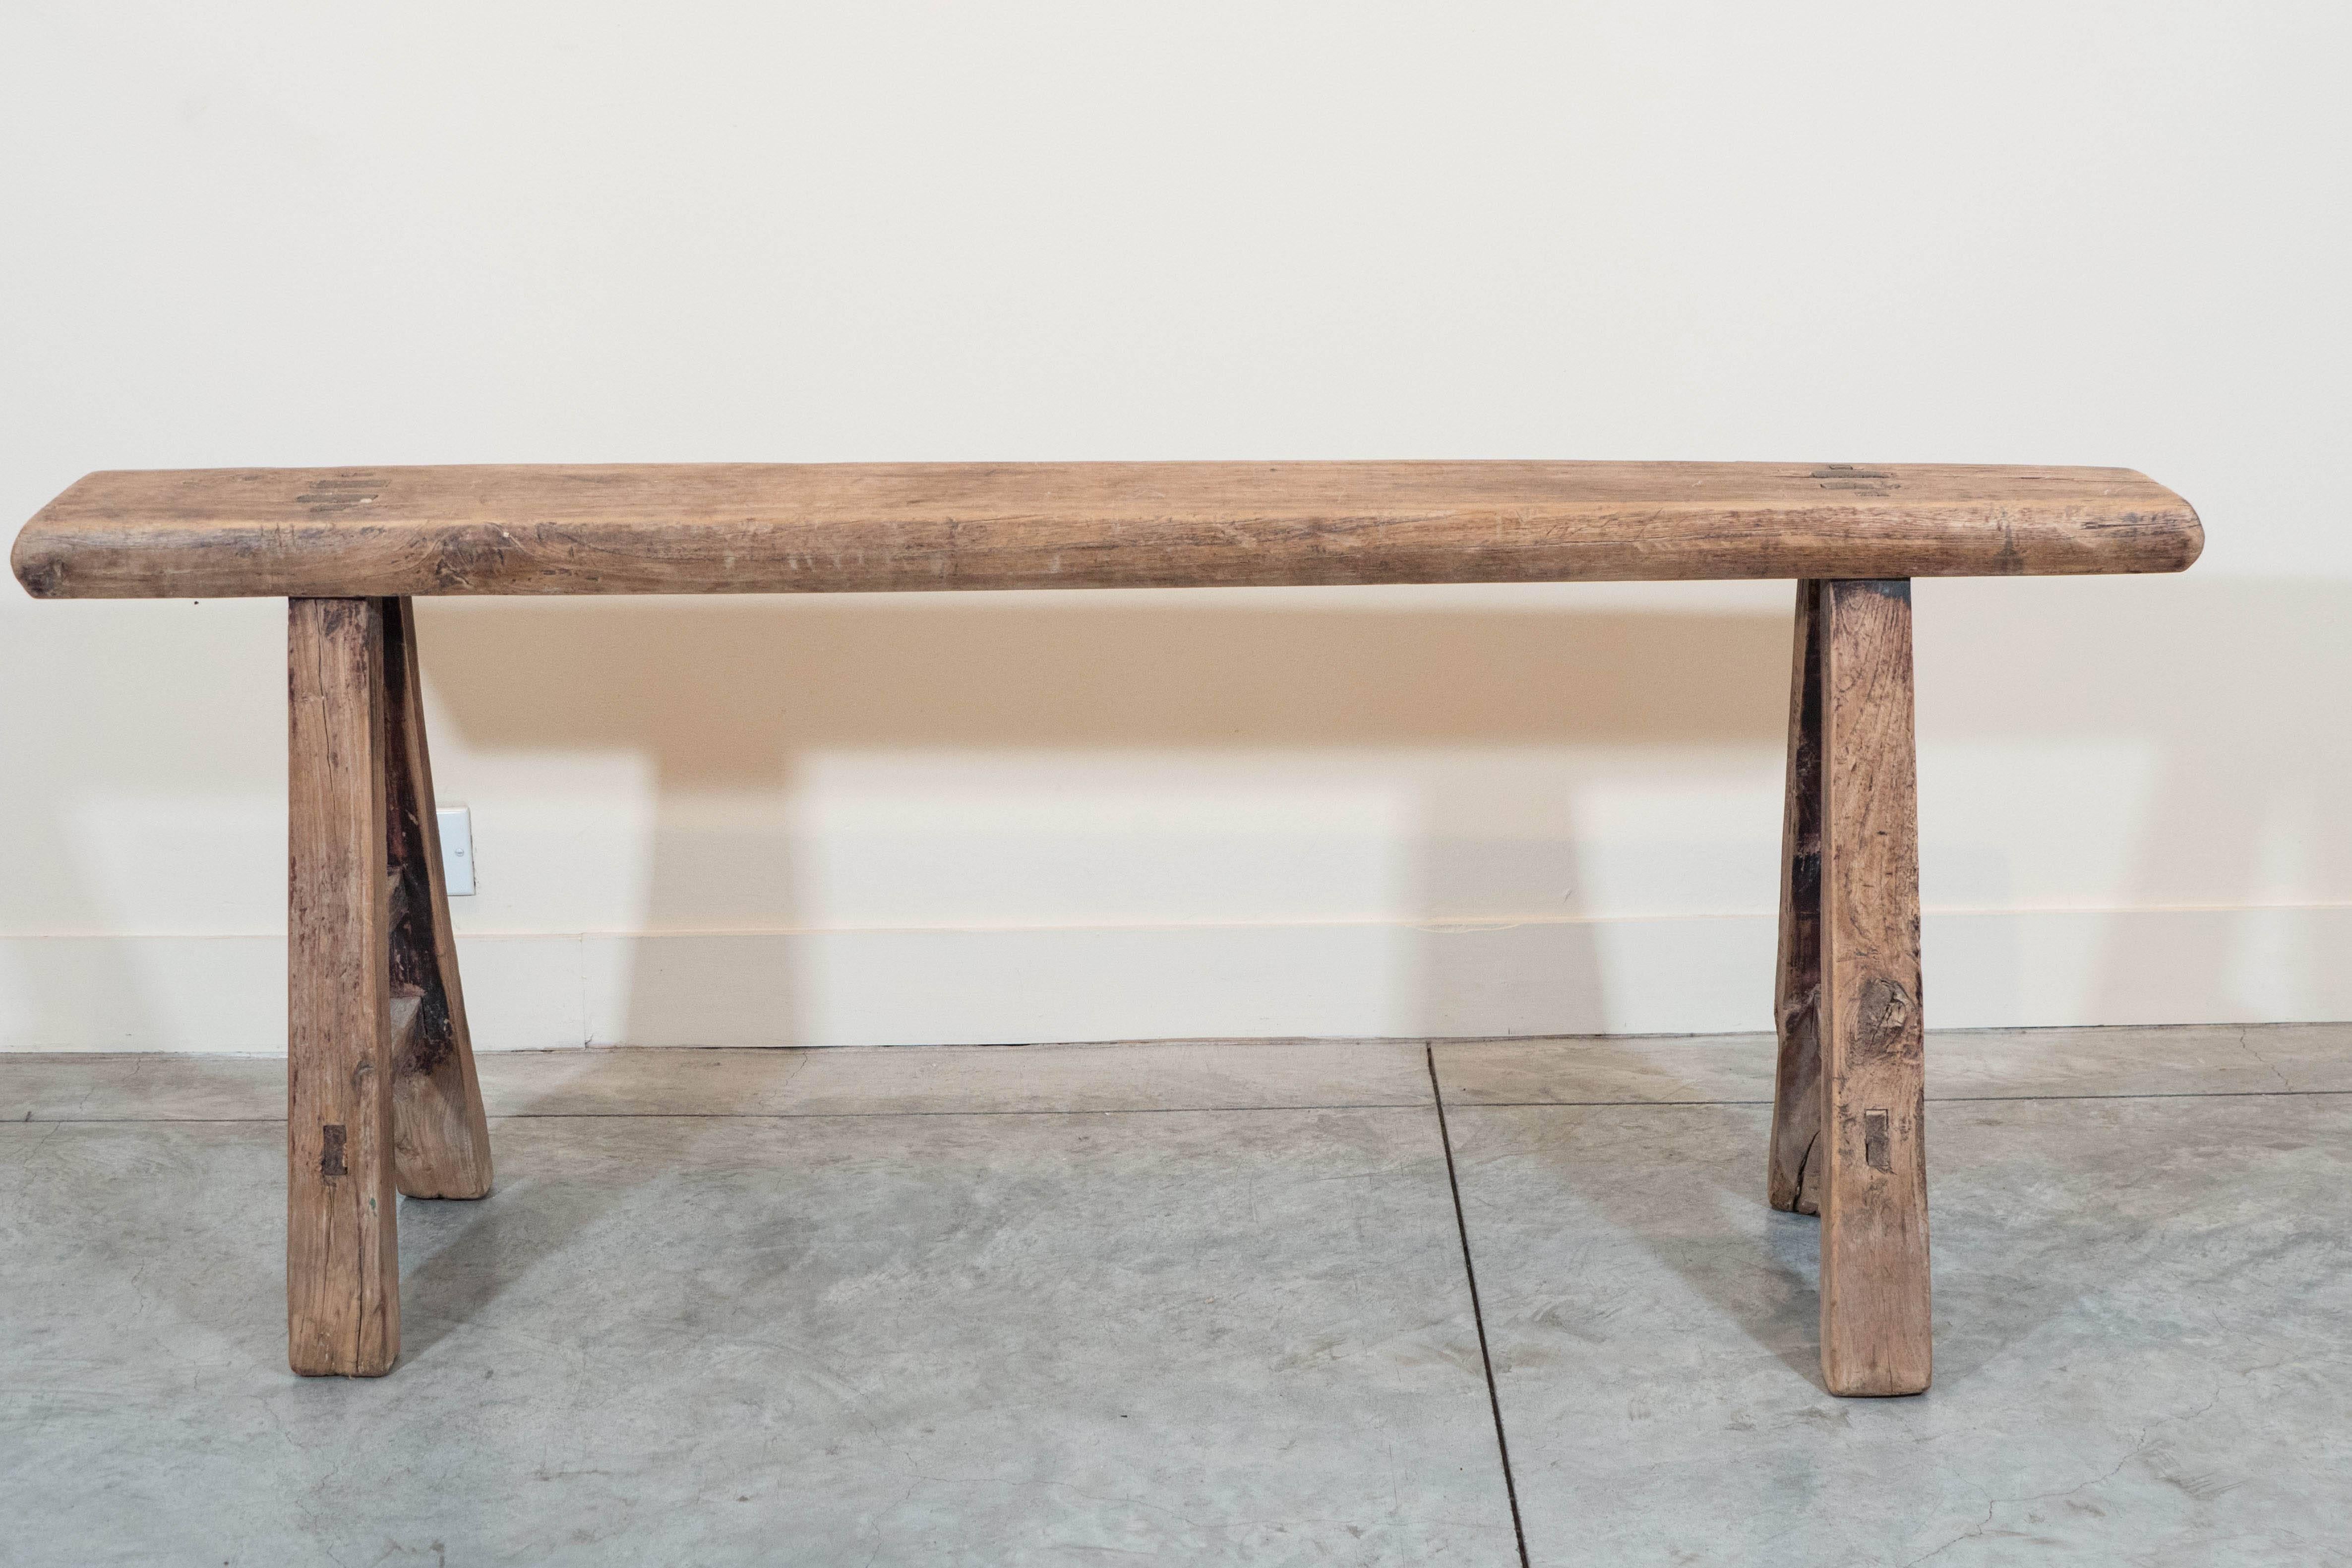 A narrow provincial bench with simple legs and sturdy seat.  From Shandong Province, c. 1900.
T587